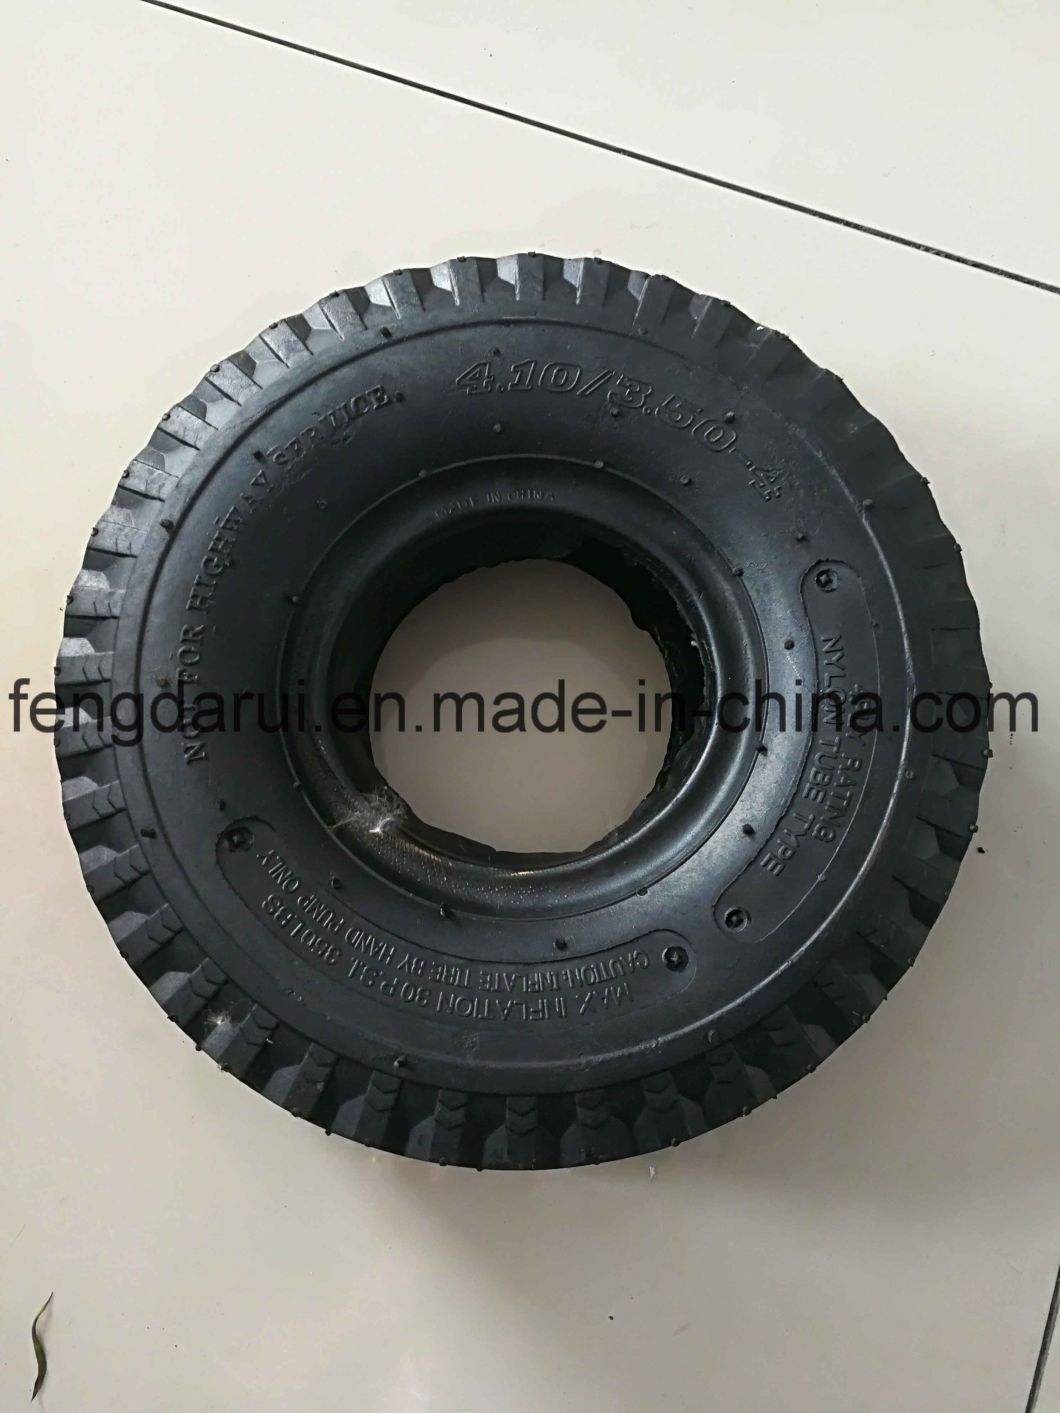 10 Inch Rbber Tyre Used for Wheel Barrow